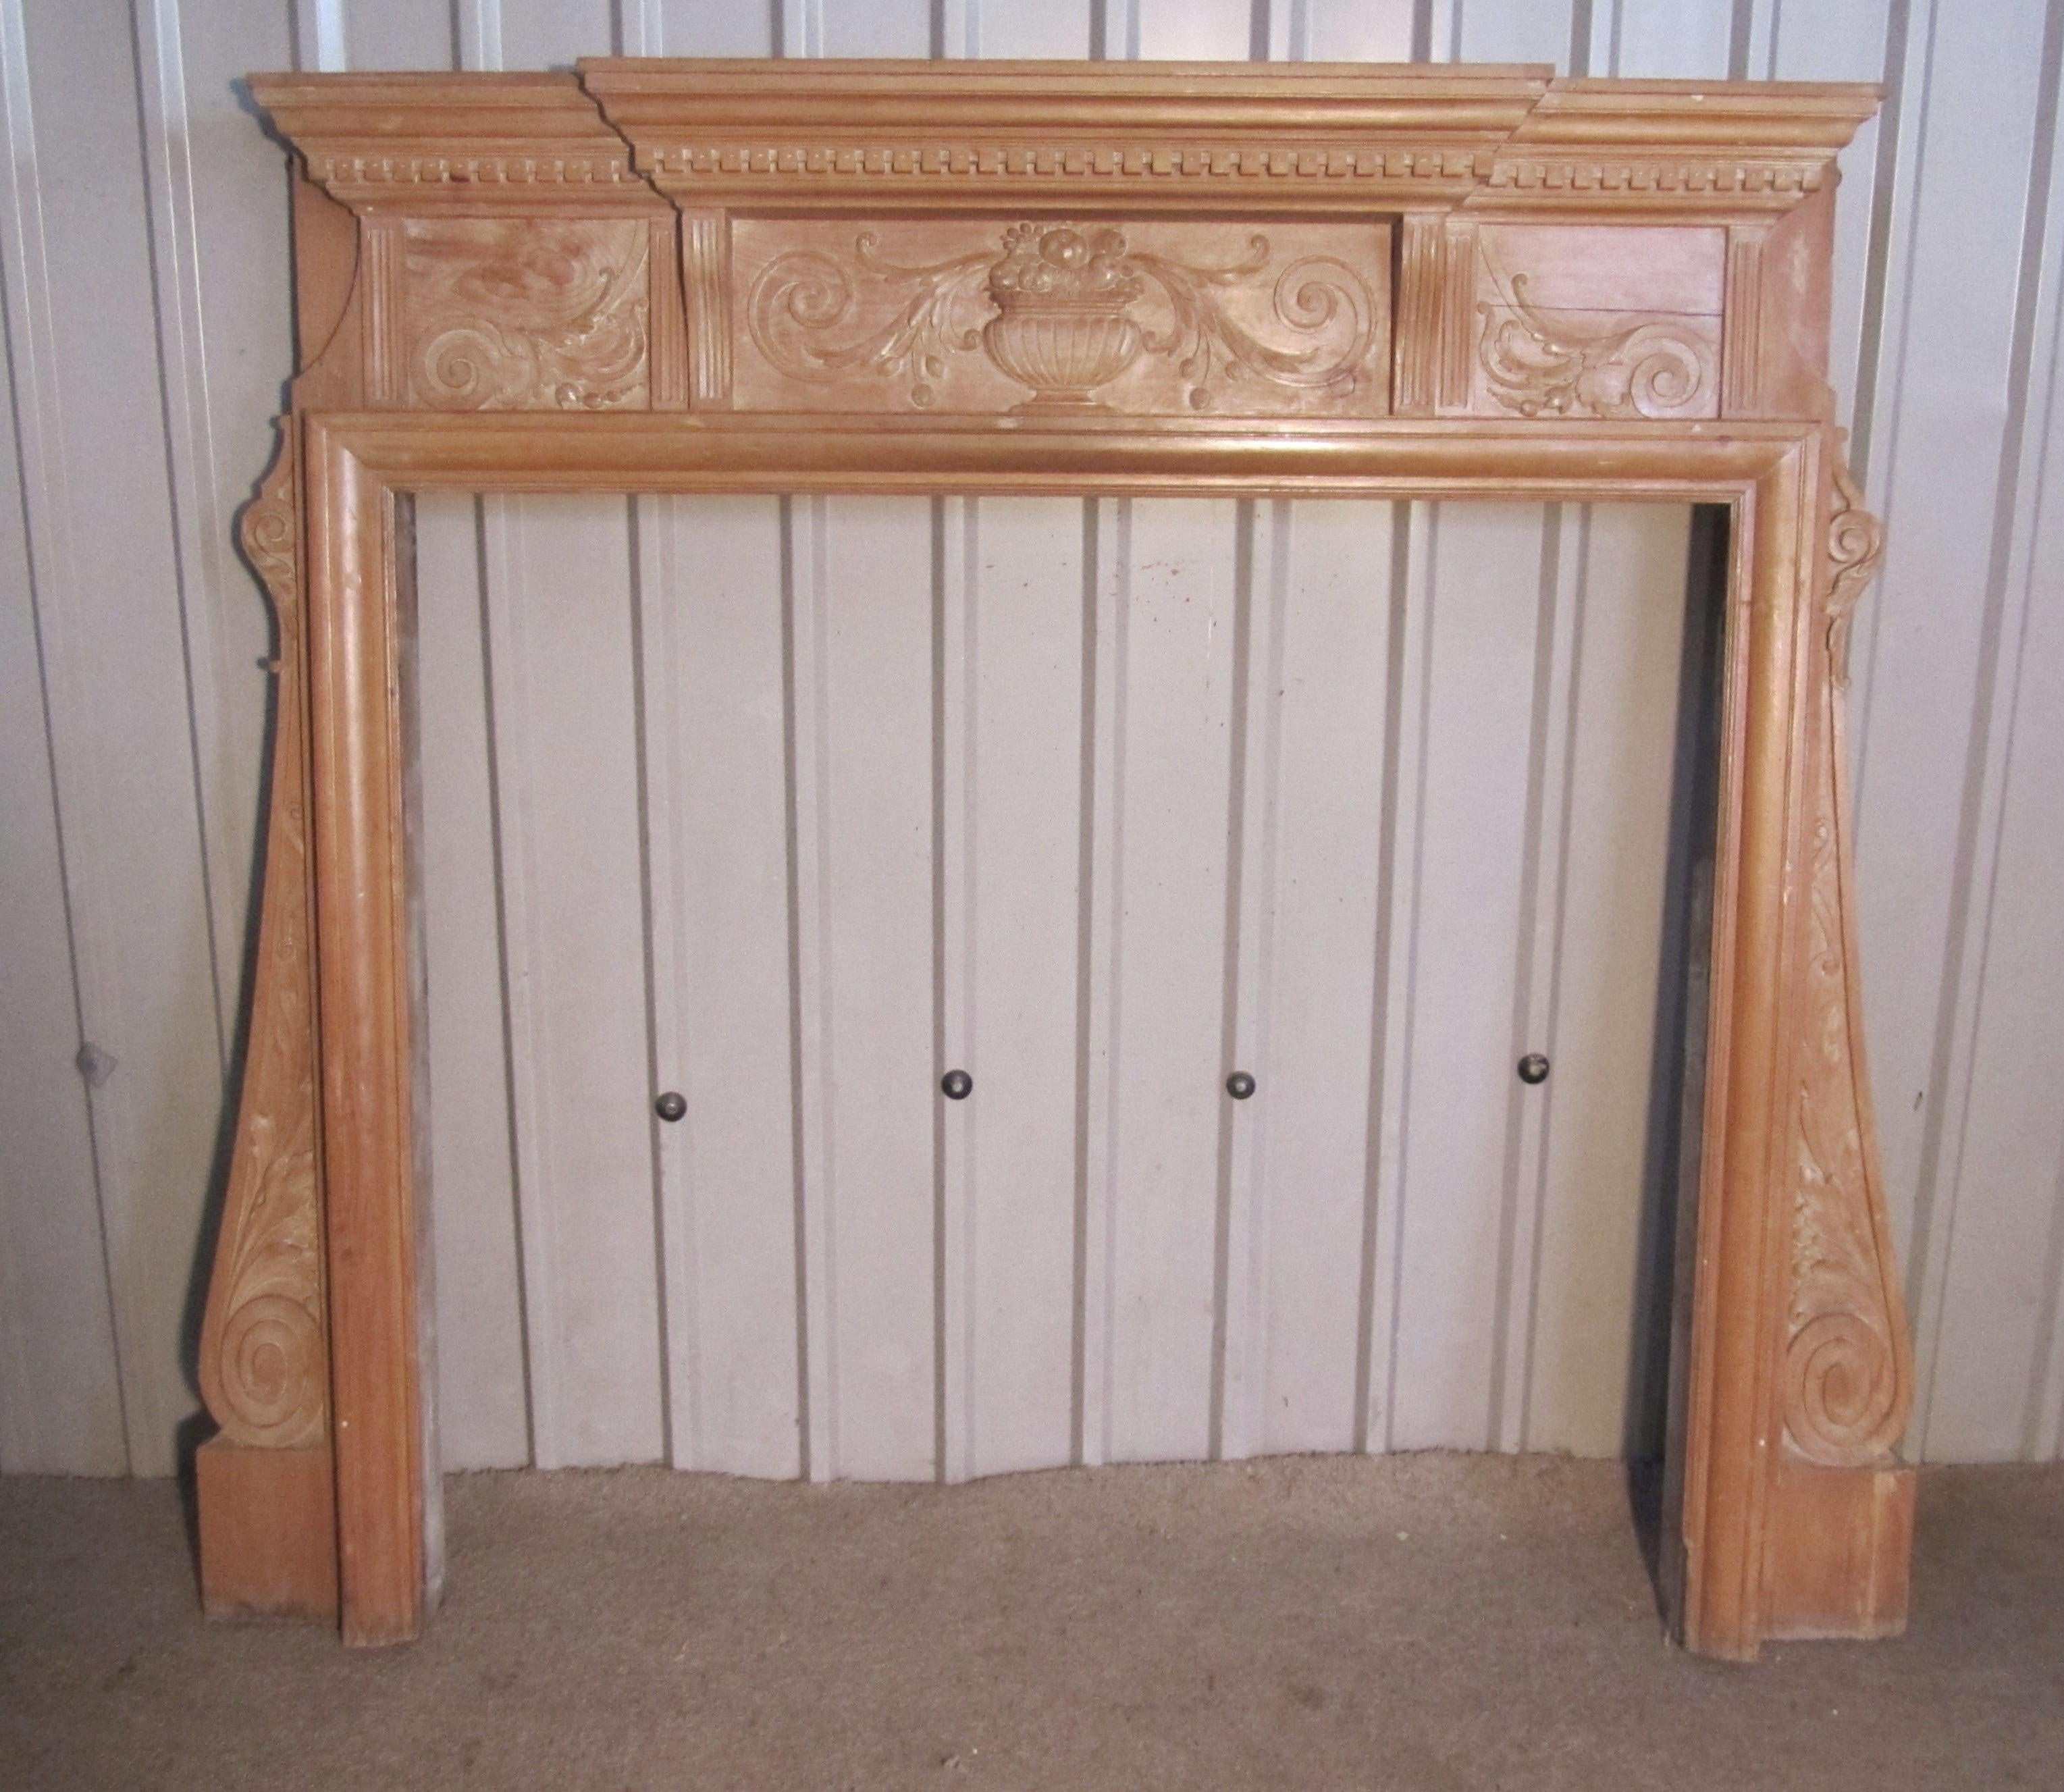 A large decorative victorian pine fireplace.

The Fireplace has a large Break Front mantle piece with dentil moulding beneath, it is supported by acanthus carved uprights and it also has carved urn centrepiece at the front.
The Fireplace has been